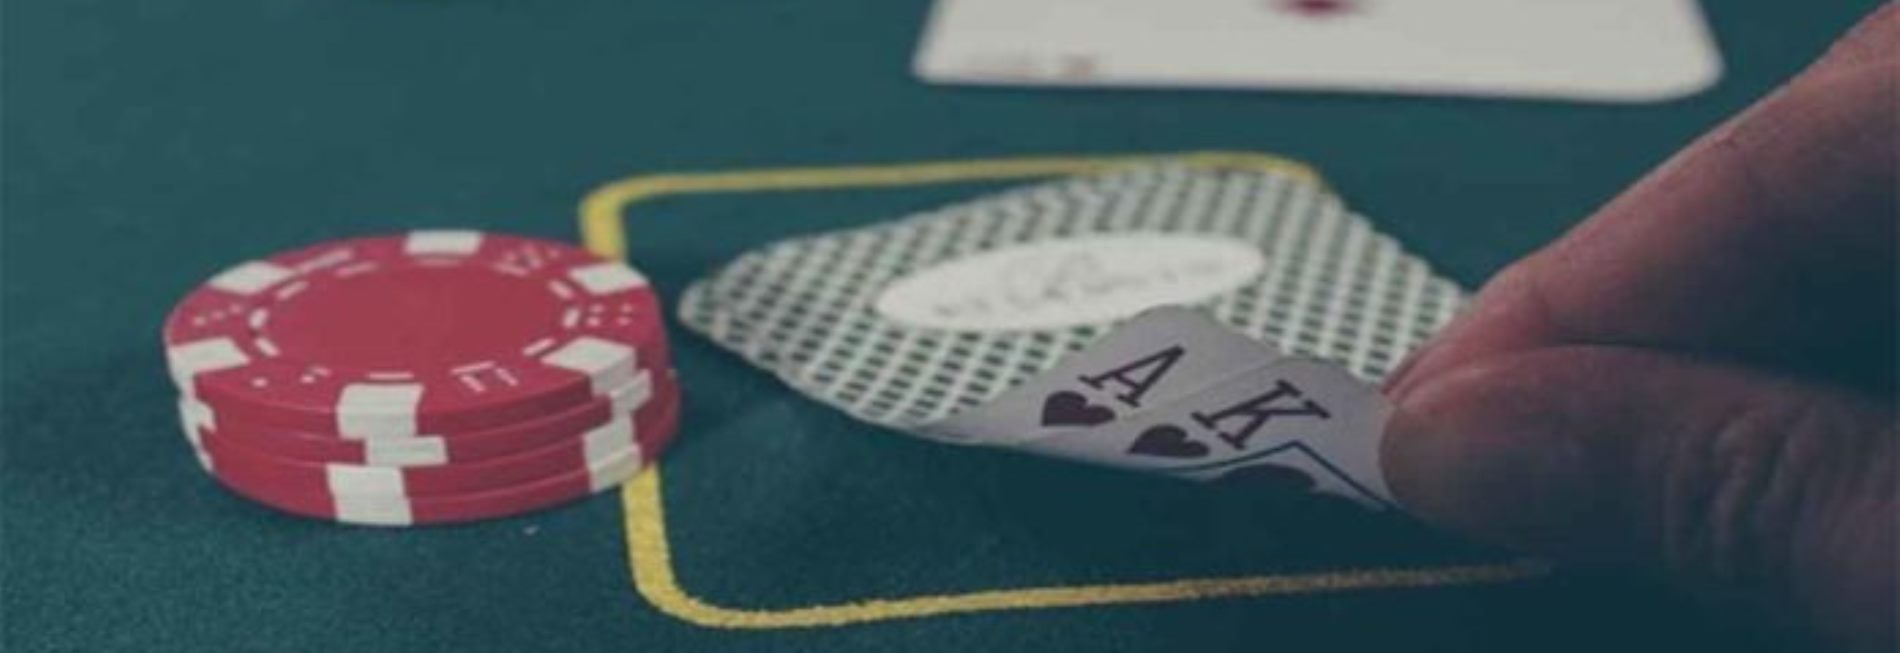 5 Tips for Improving Your Texas Hold’em Skills in 2021